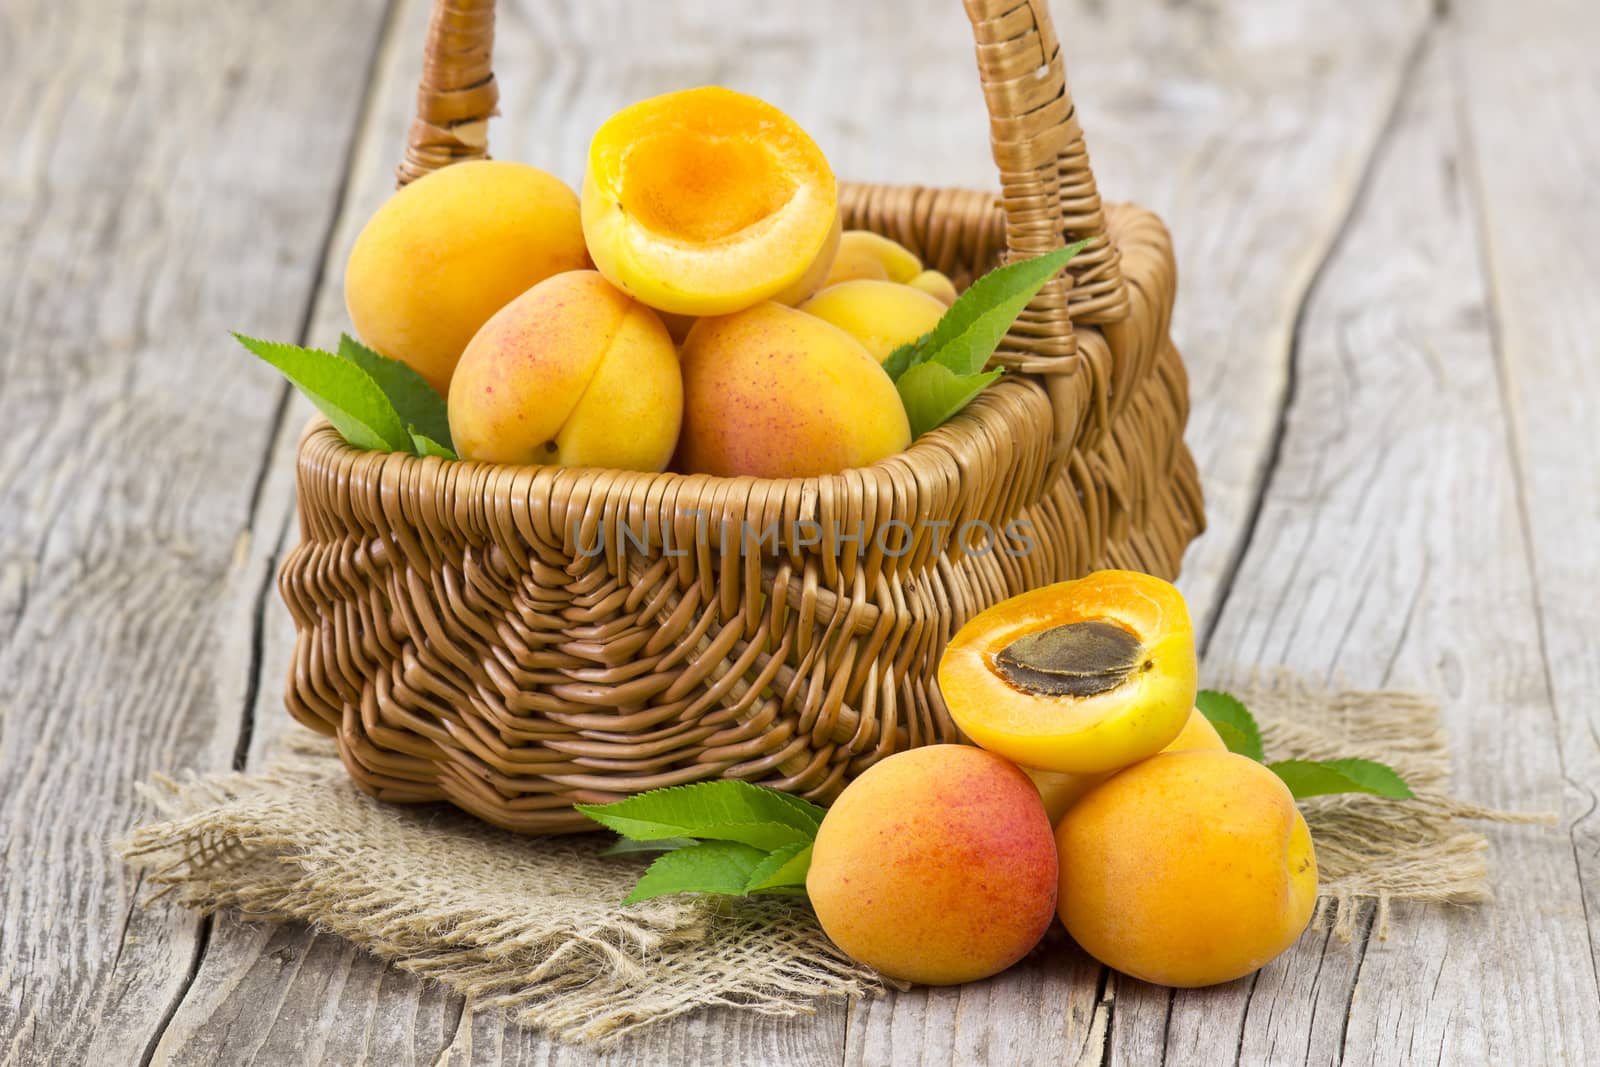 fresh apricots in a basket on wooden background by miradrozdowski